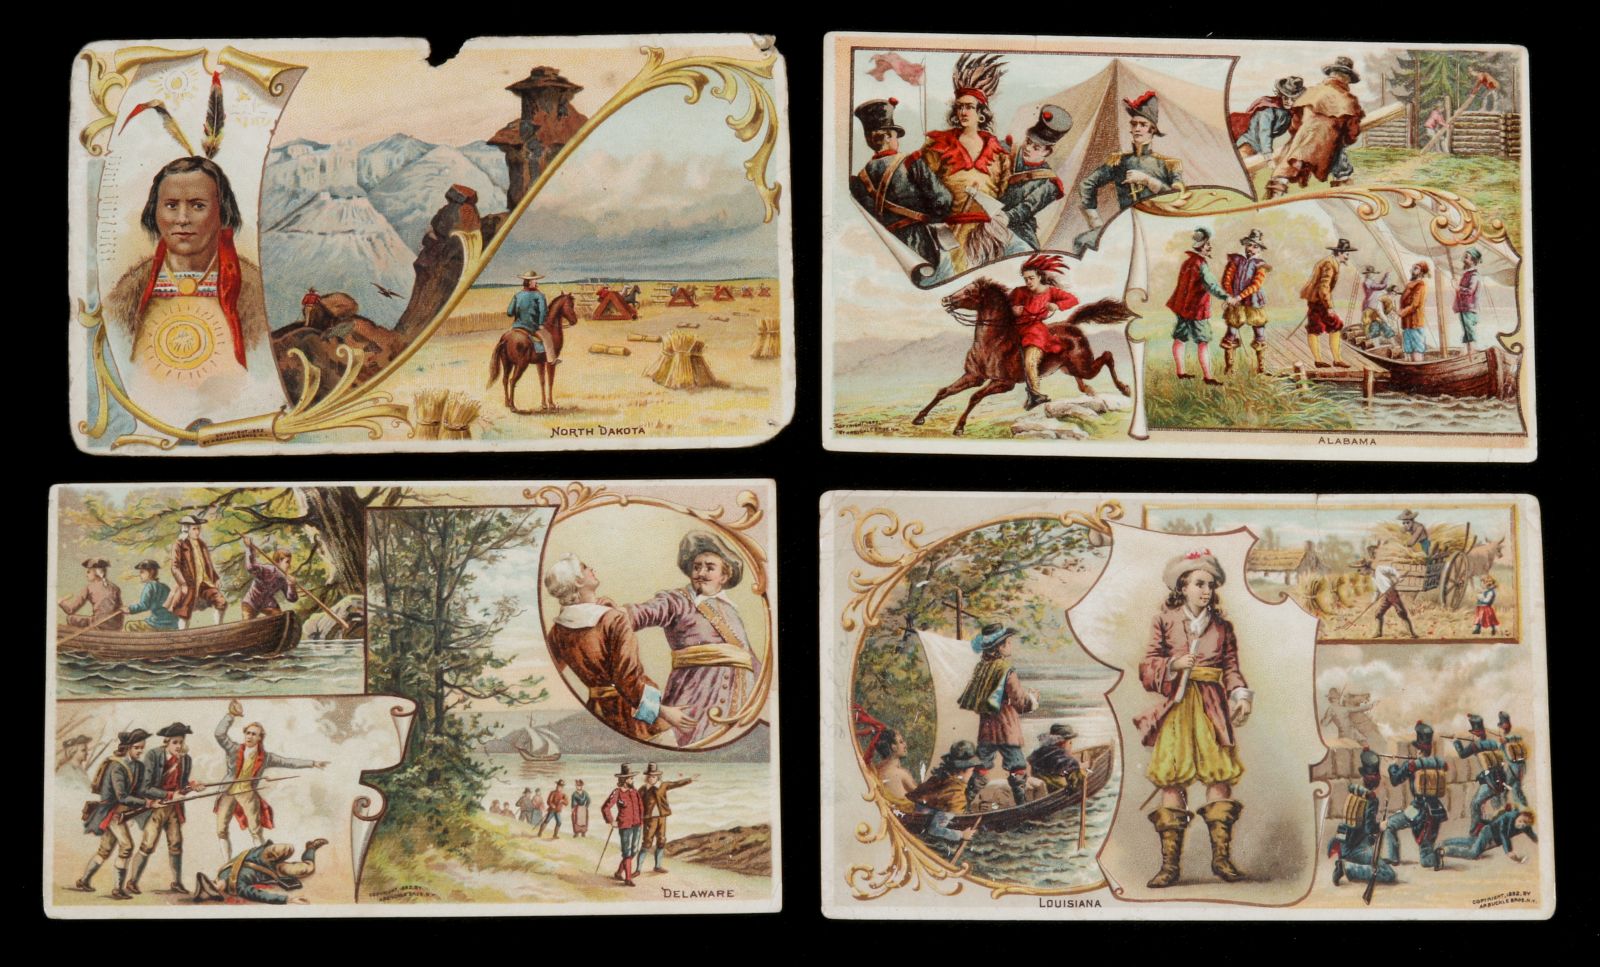 ARBUCKLE COFFEE U.S. PICTORIAL HISTORY TRADE CARDS